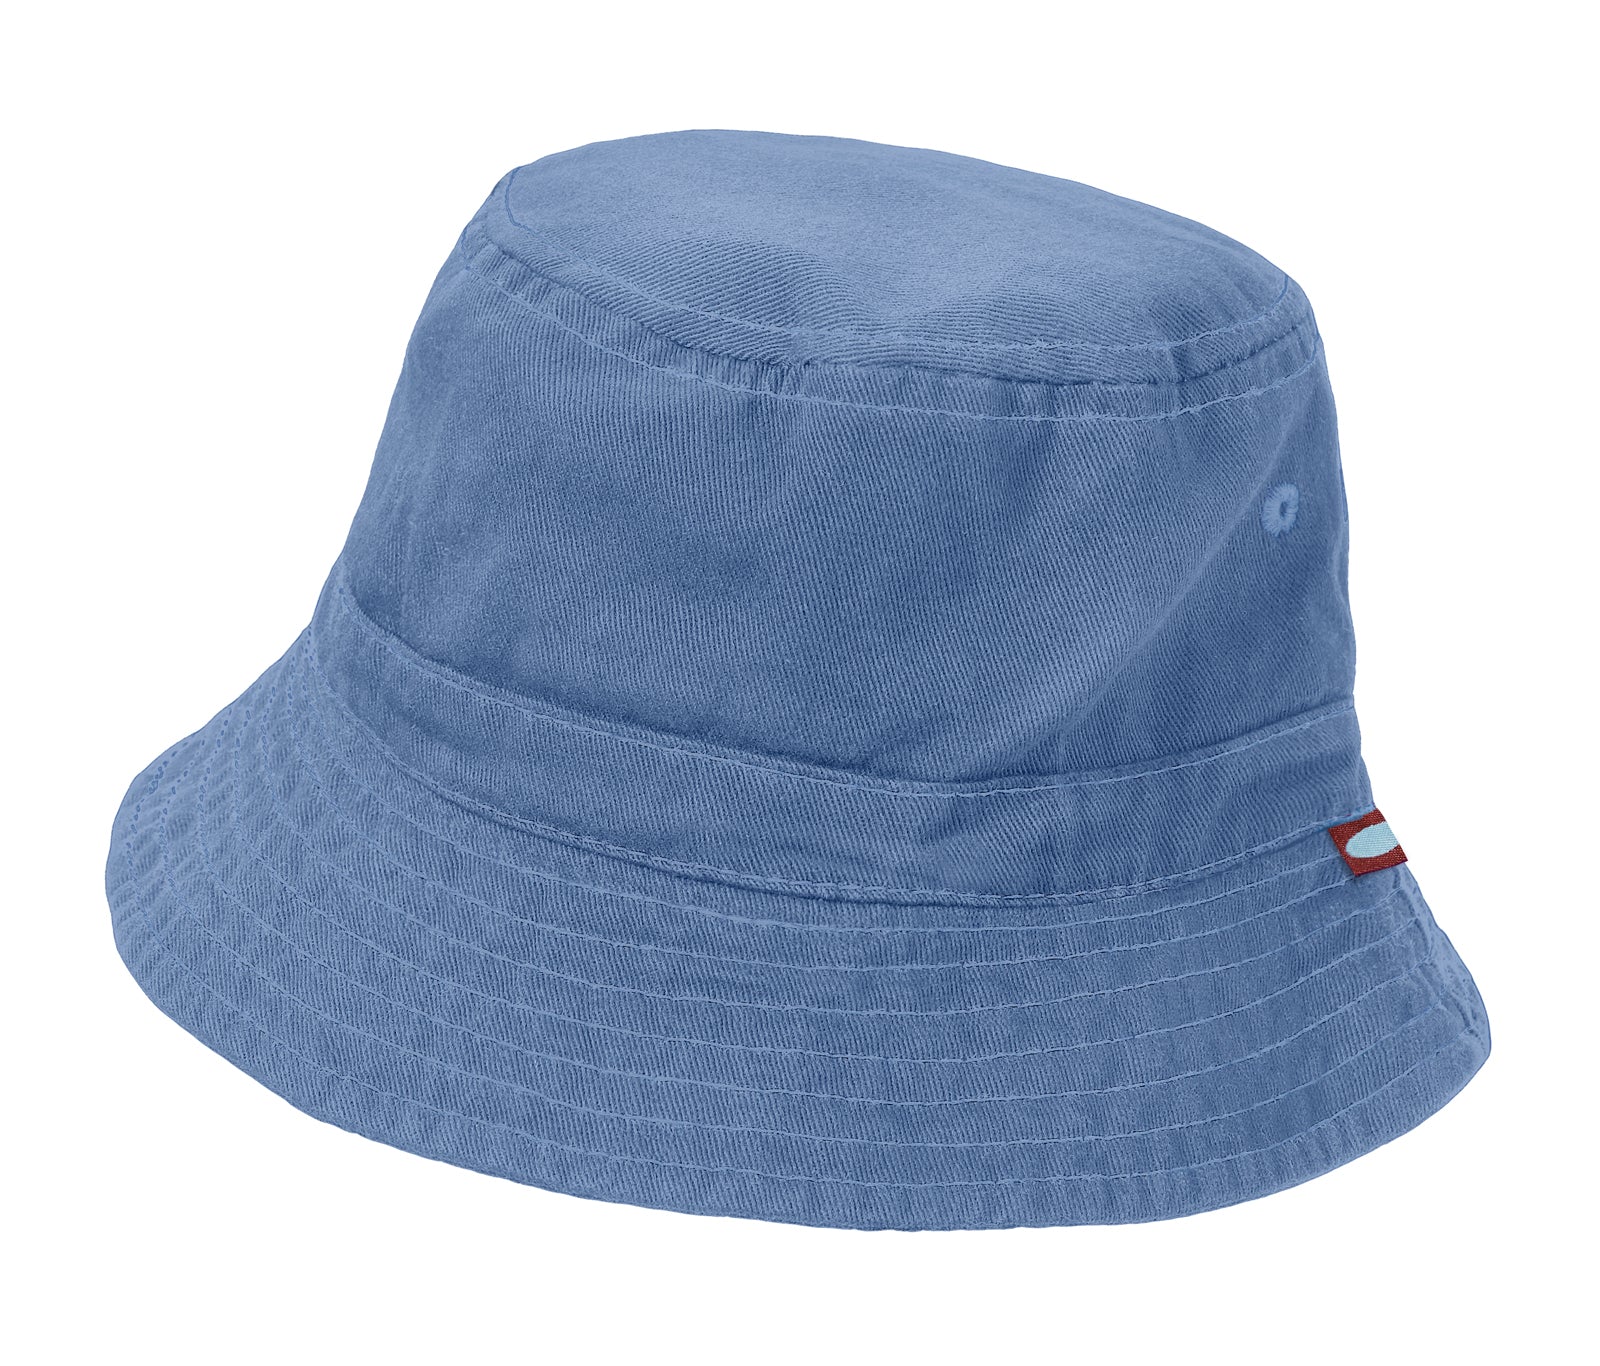 Wharf Hat , Boys and Girls 100% Cotton Twill UPF 50+ with Matching Stitch | Denim Blue / L (2-3Y) - Kids Cap, USA Made, Sun Protection, City Threads